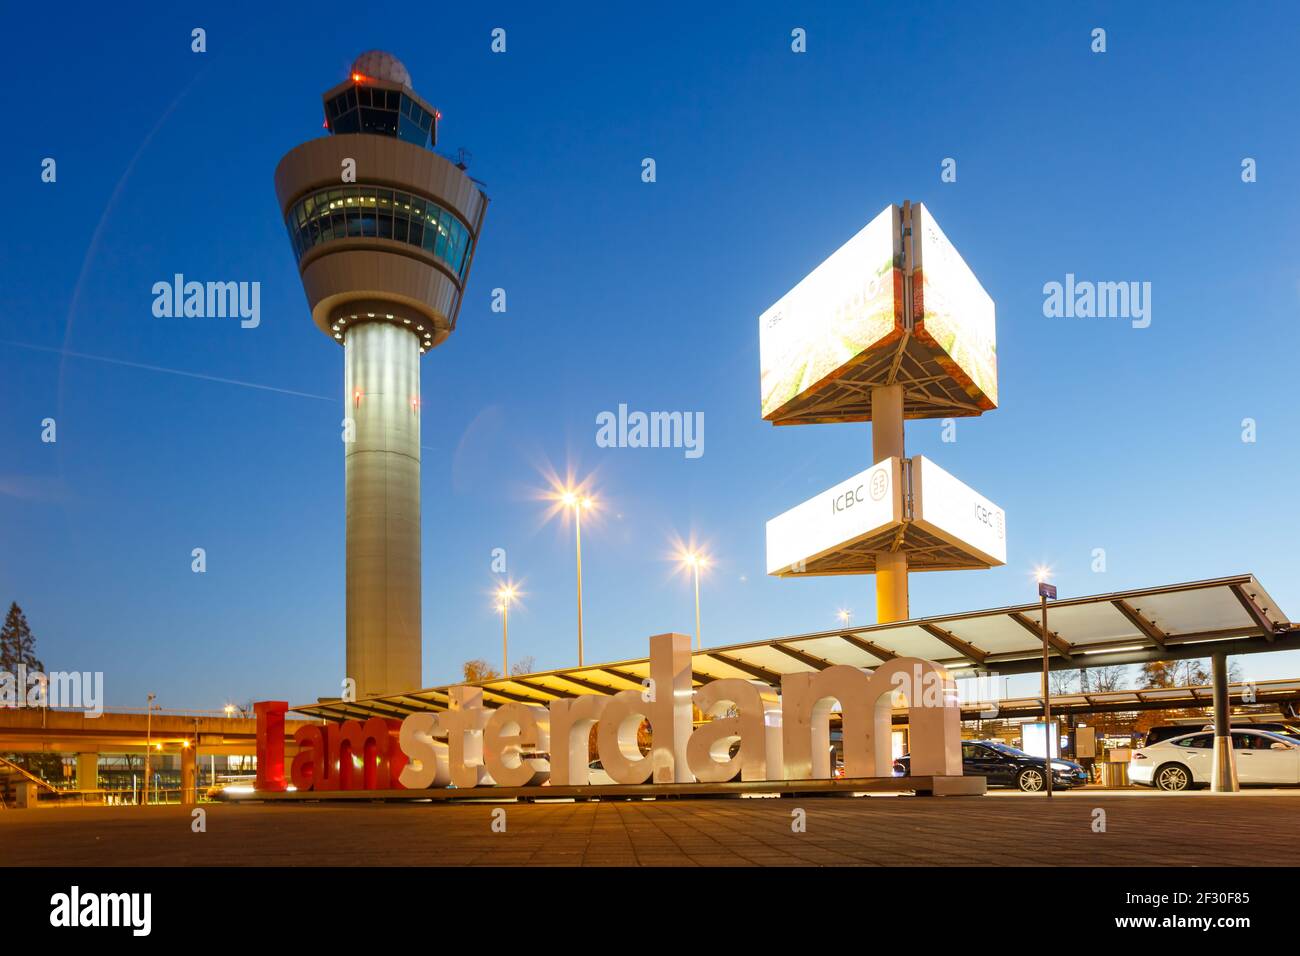 Amsterdam, Netherlands - November 22, 2017: Tower at Amsterdam Schiphol Airport (AMS) in the Netherlands. Stock Photo